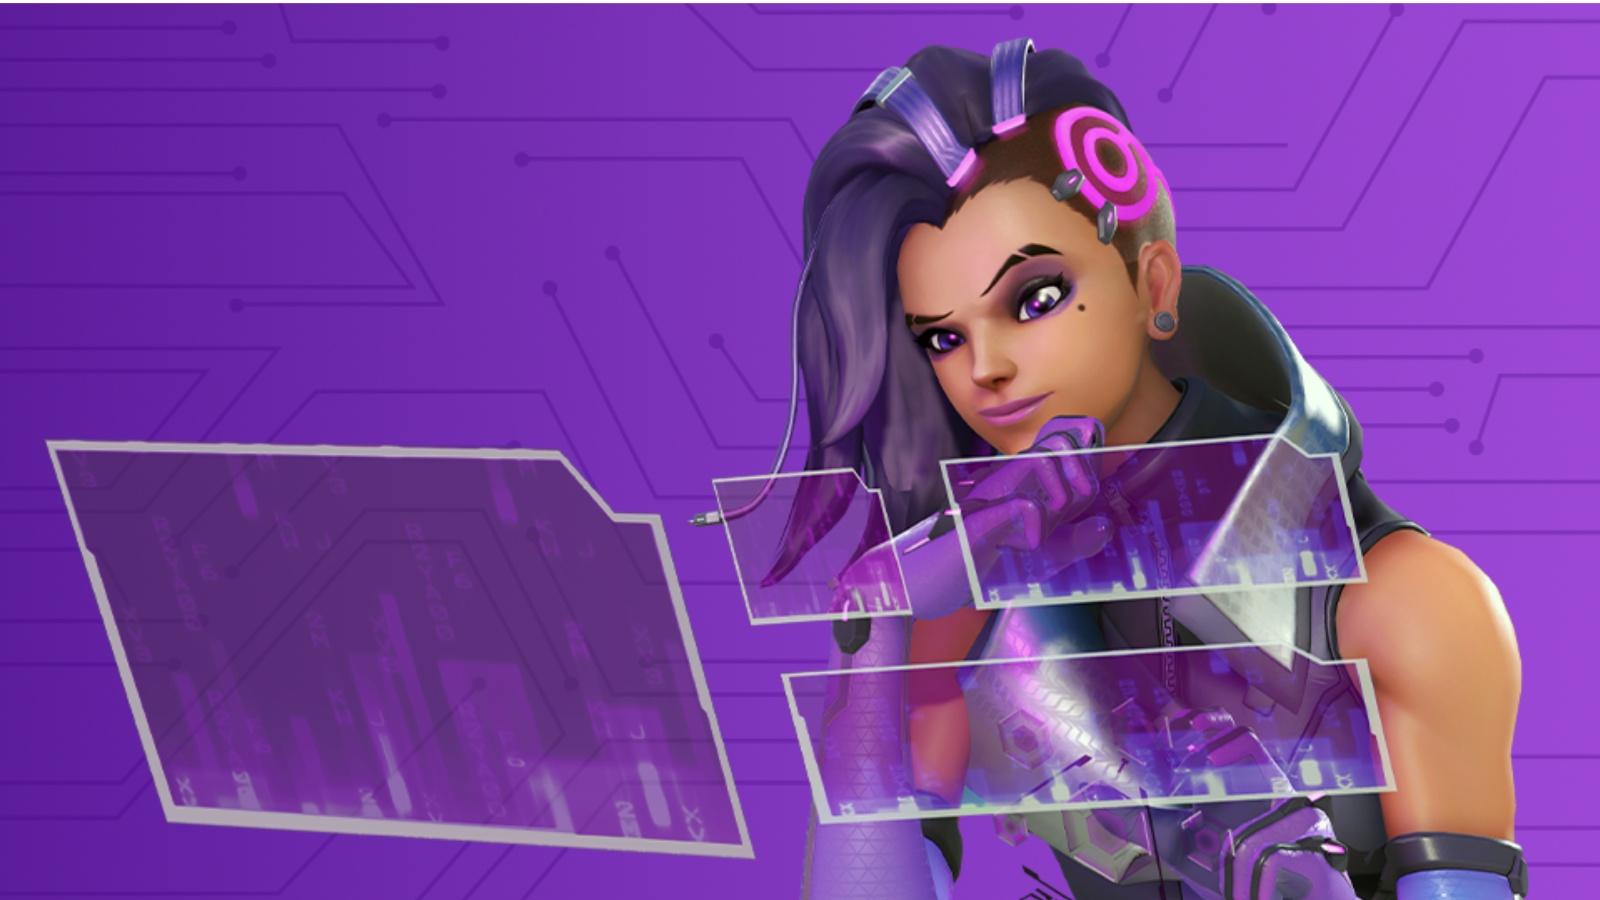 A cover art featuring Sombra from the Quicker Play limited-time mode in Overwatch 2.